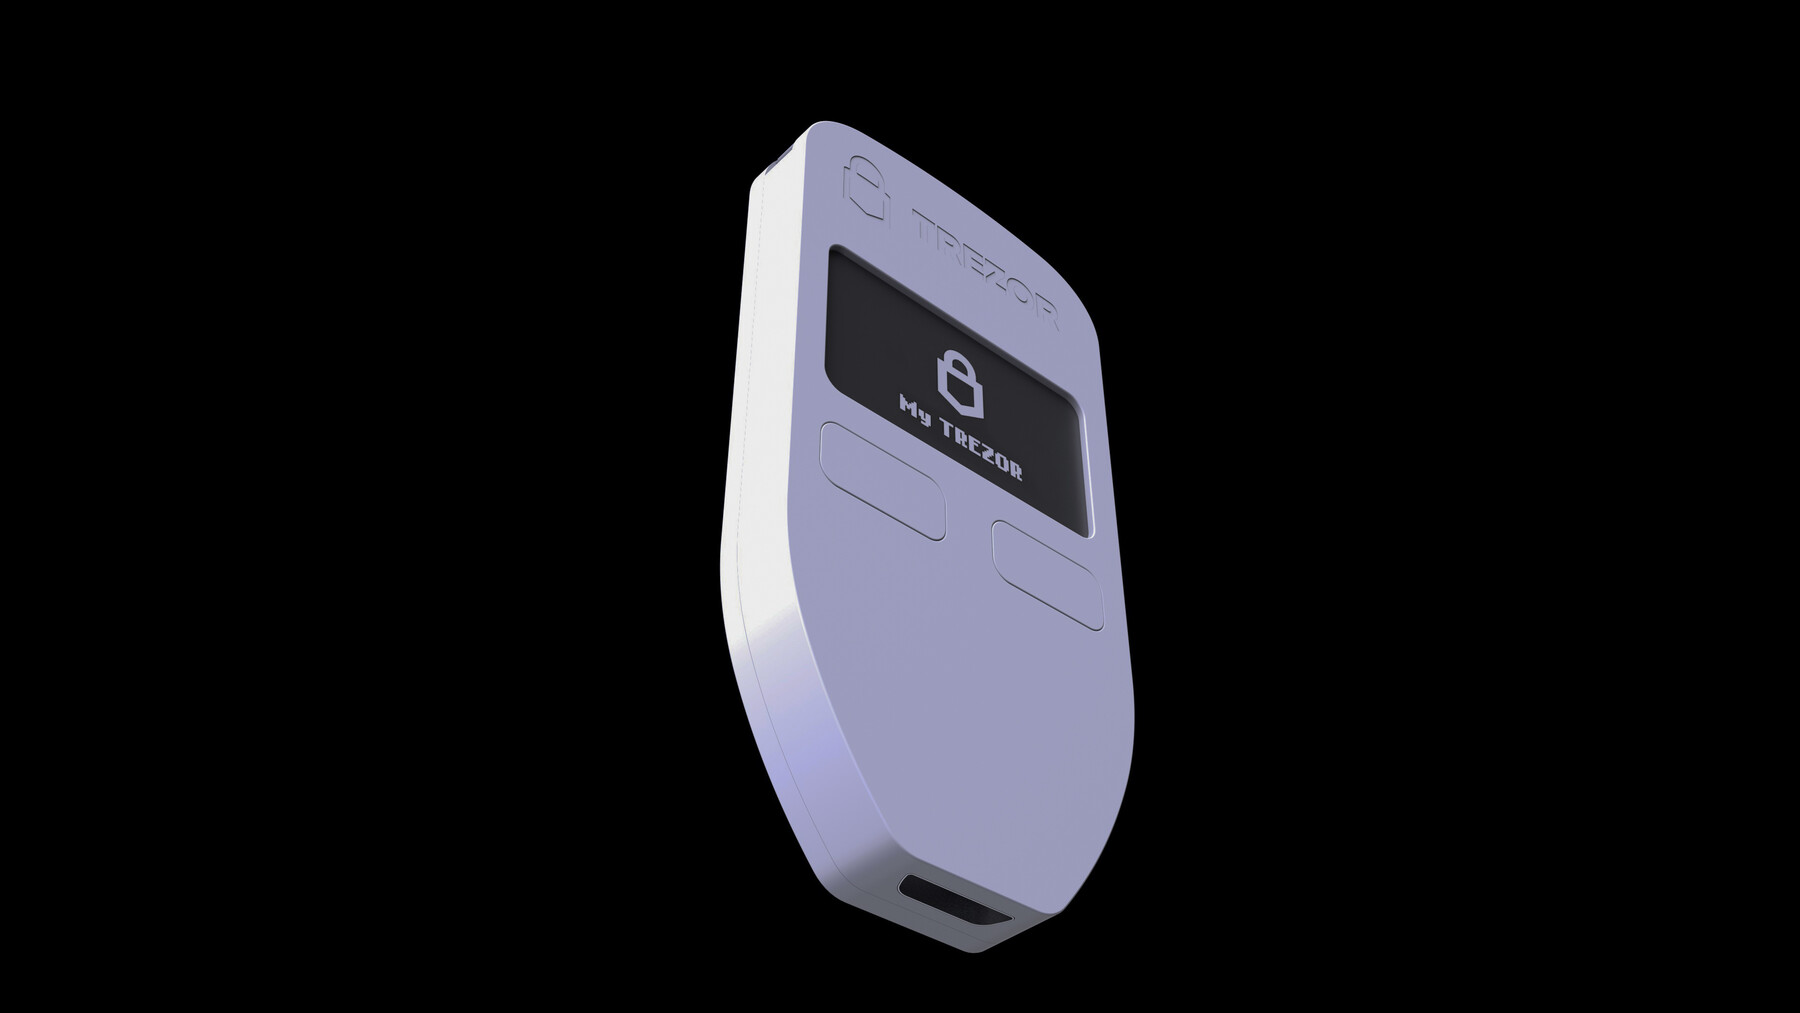 The Trezor Bitcoin wallet is the best crypto hardware wallet for budget-conscious crypto users